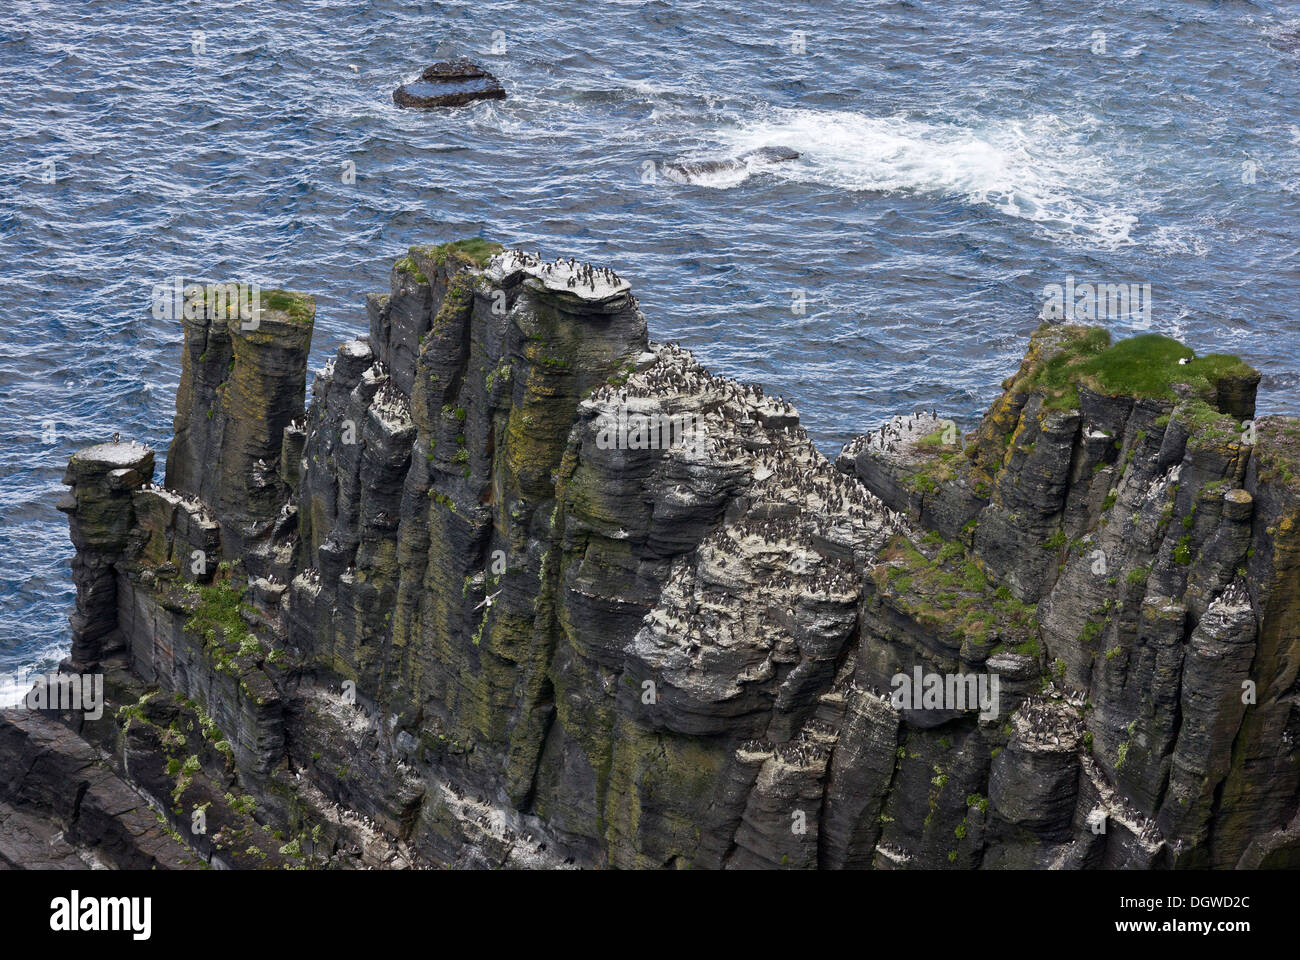 Spectacular view of the seabird colonies, mainly guillemots and razorbills, on the Cliffs of Moher, Burren, Eire Stock Photo